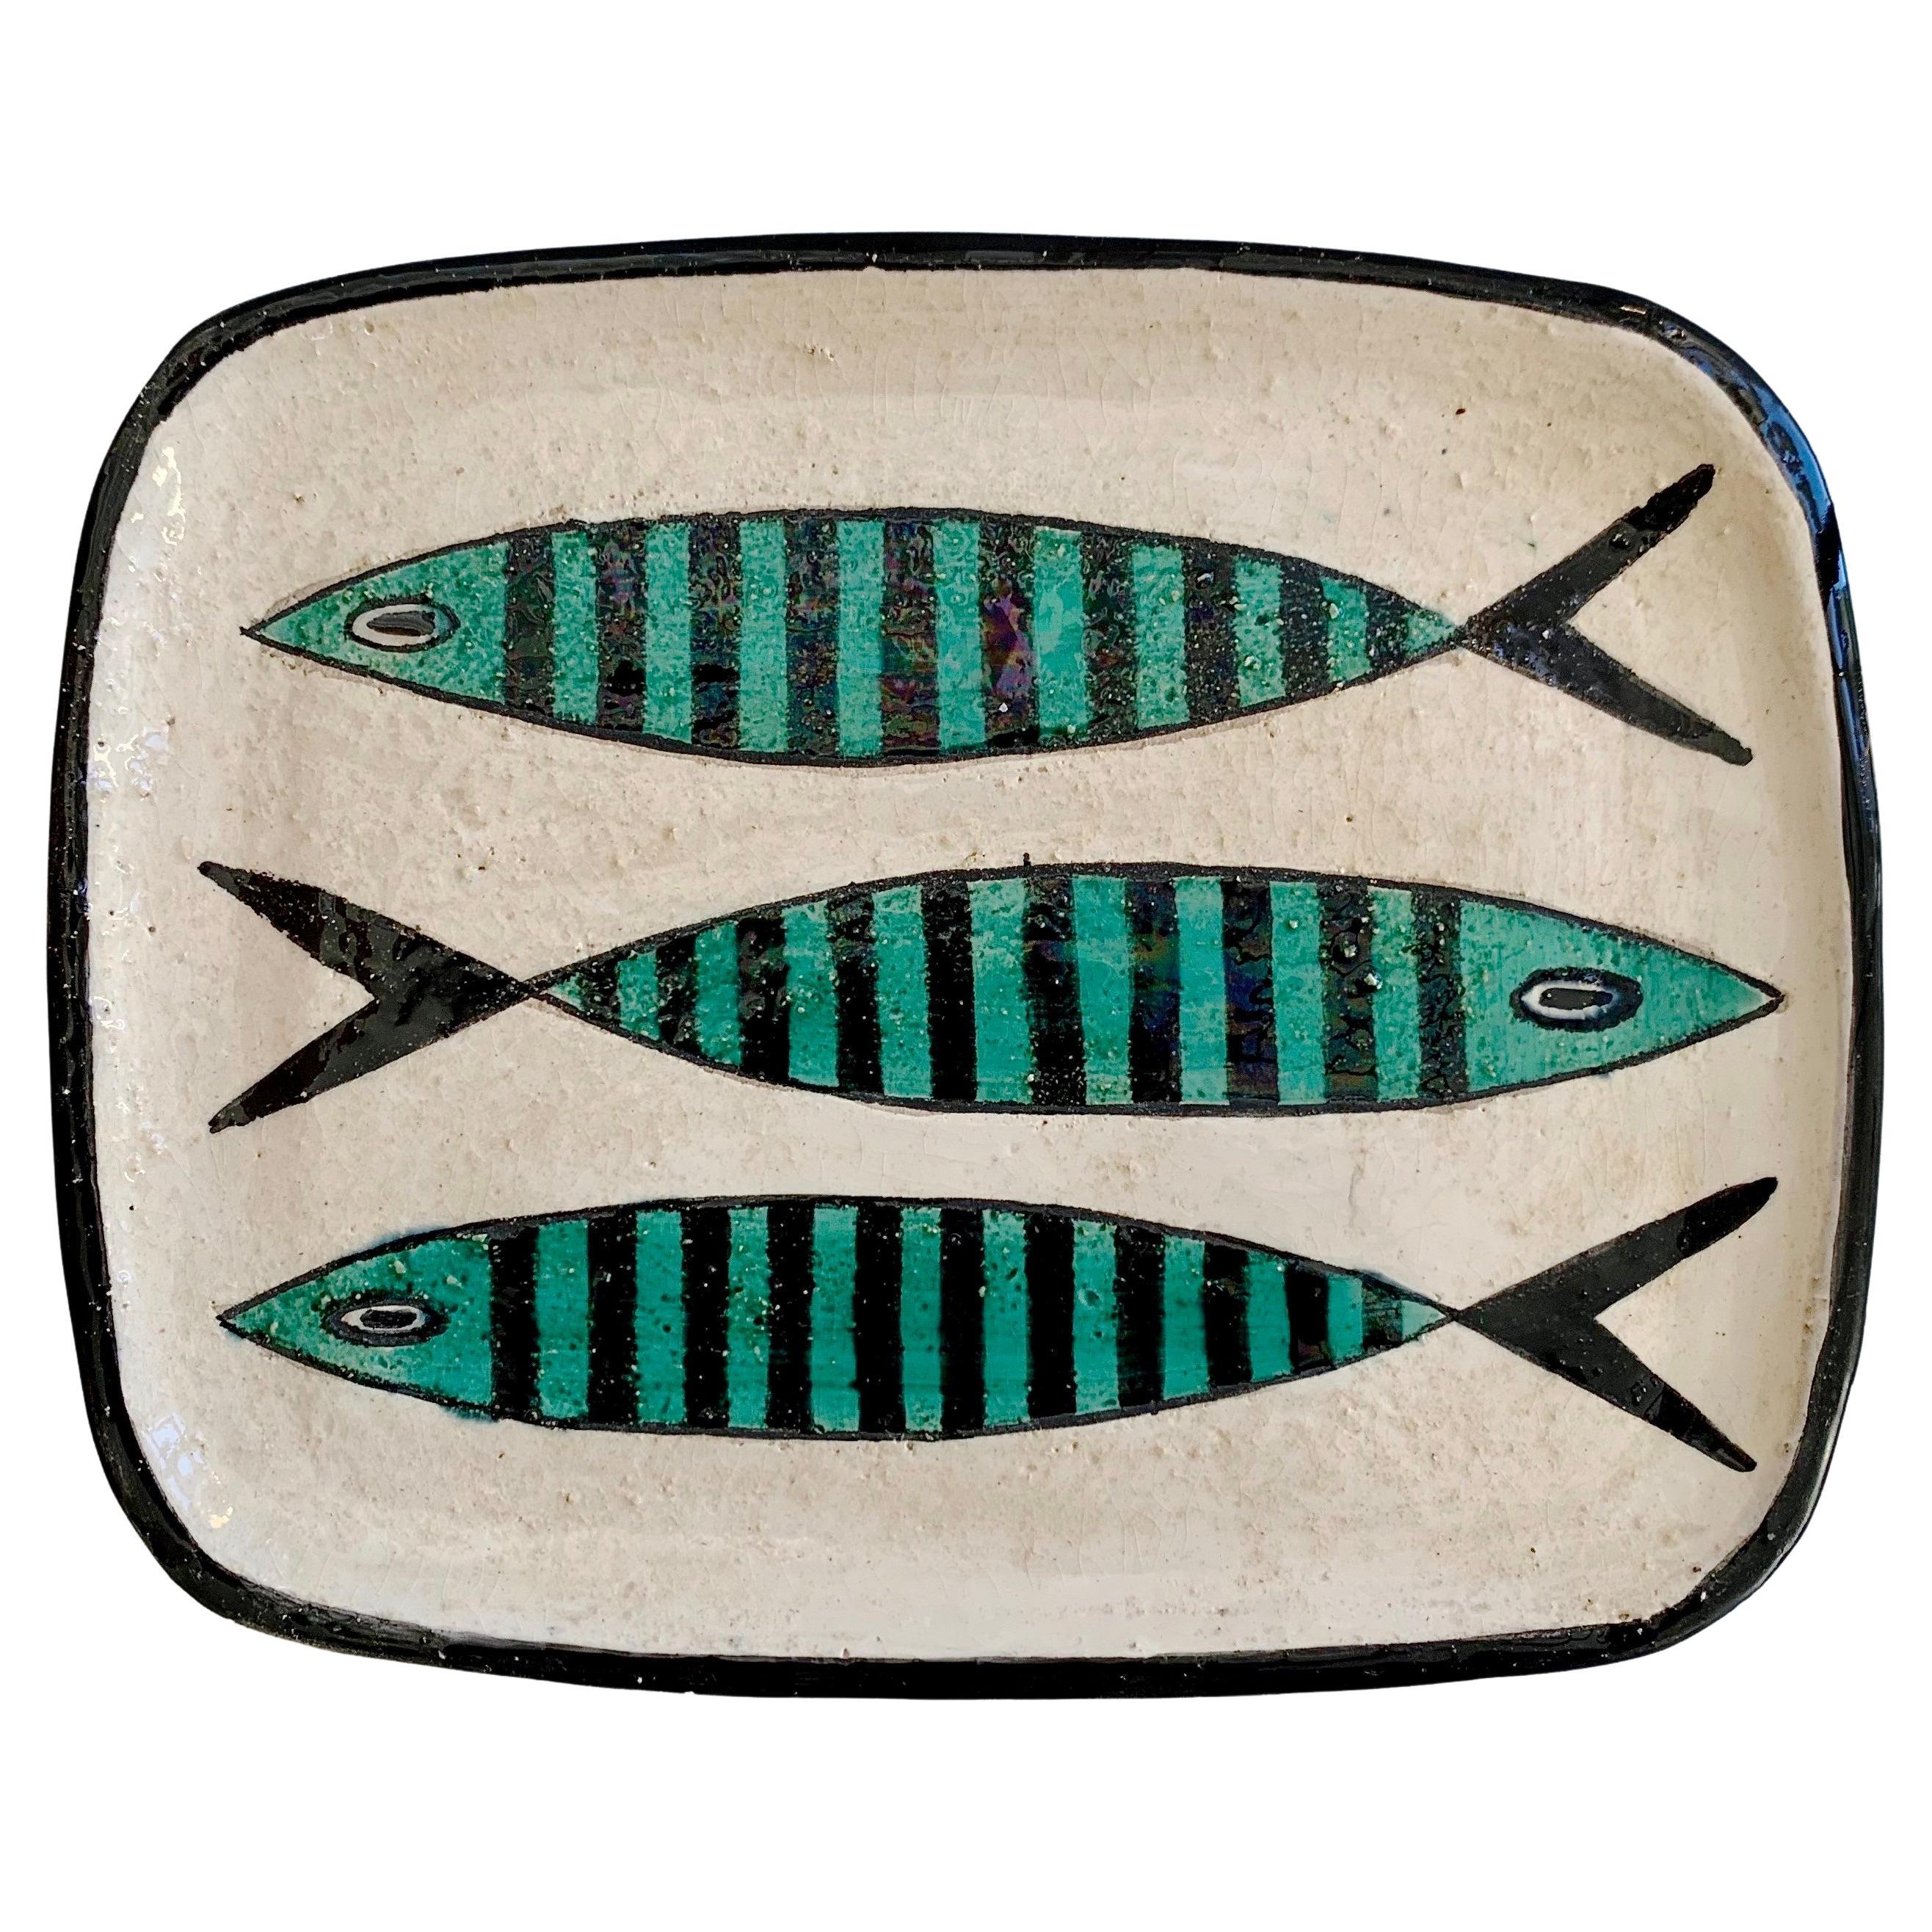 Beautiful Odette Dijeux signed vide-poche or dish, circa 1950, Belgium.
Enameled white and black ceramic with 3 hand-painted black and green striped fish .
Signed underneath: Odette Dijeux 171 Namur.
Dimensions: 26 cm W, 21 cm D, 2 cm D.
All